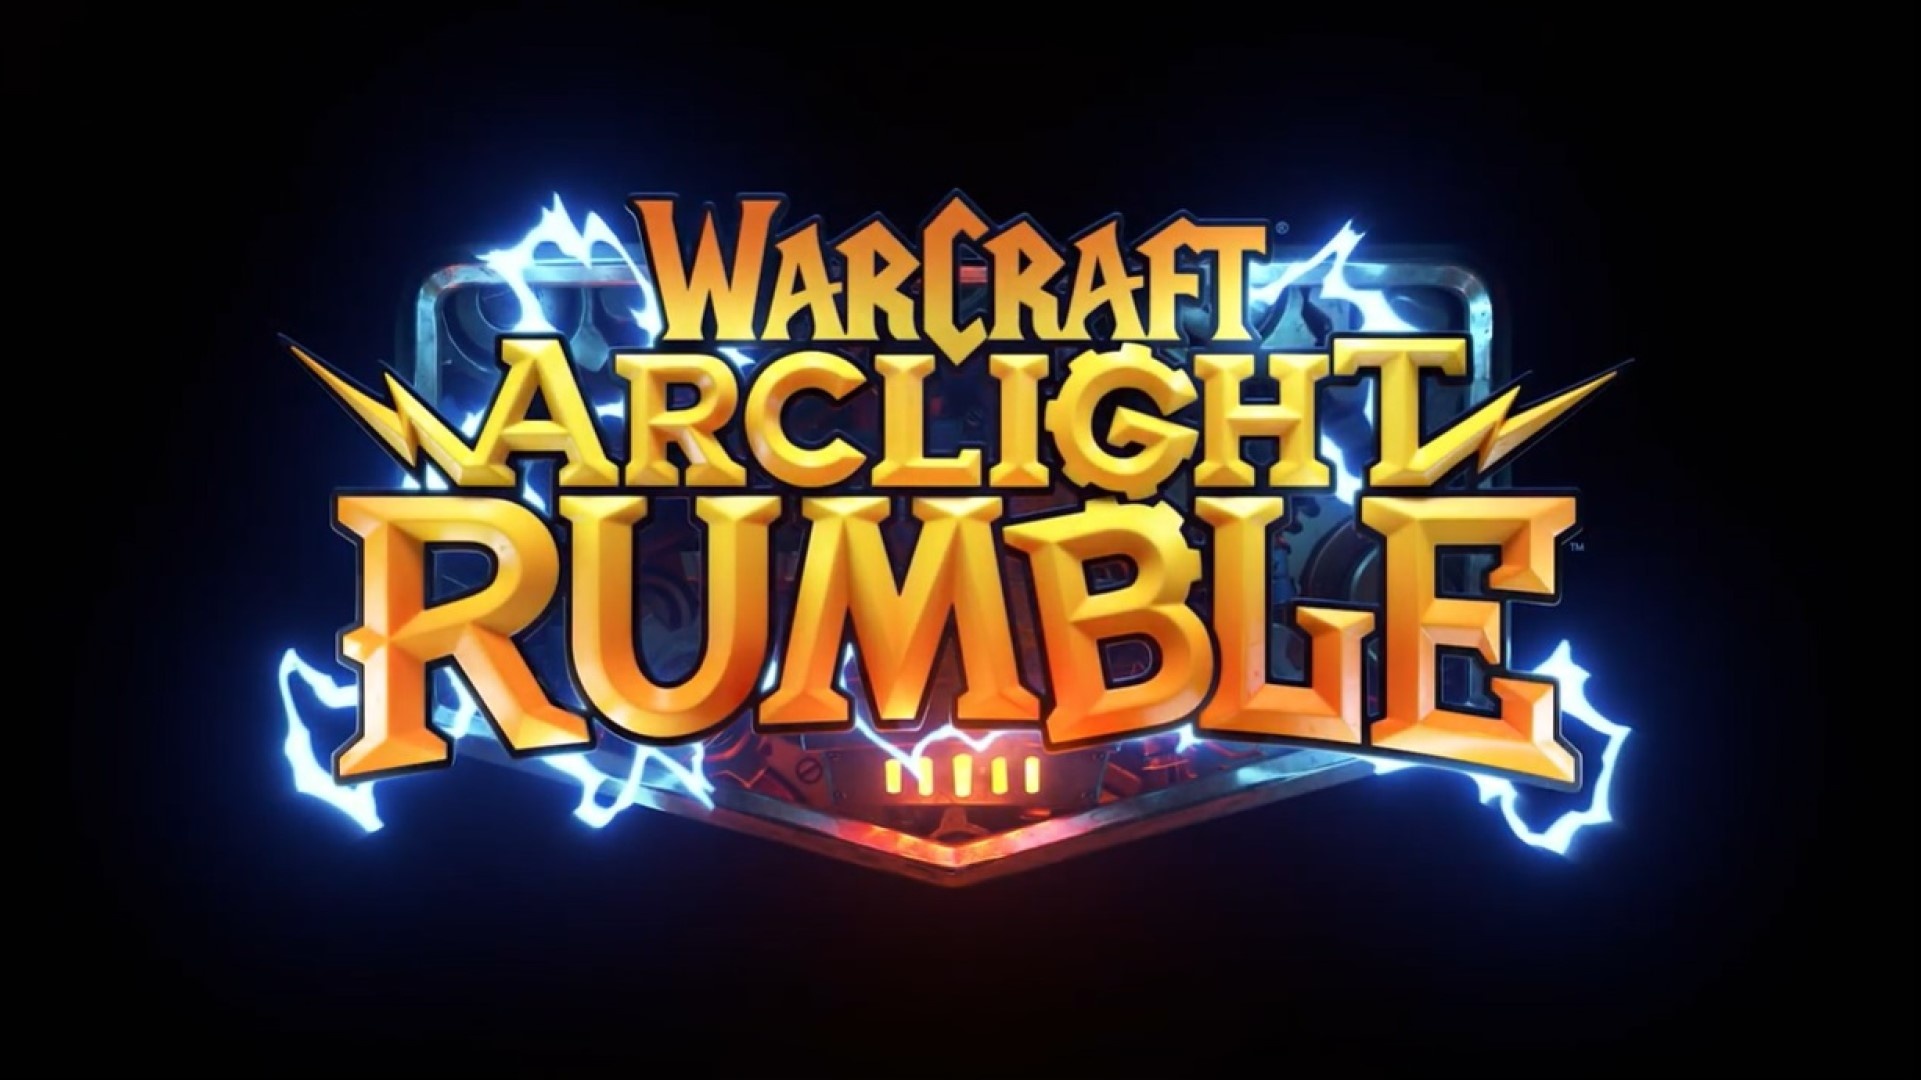 Warcraft Arclight Rumble: A part of the Warcraft saga universe, A free-to-play game. 1930x1080 HD Wallpaper.